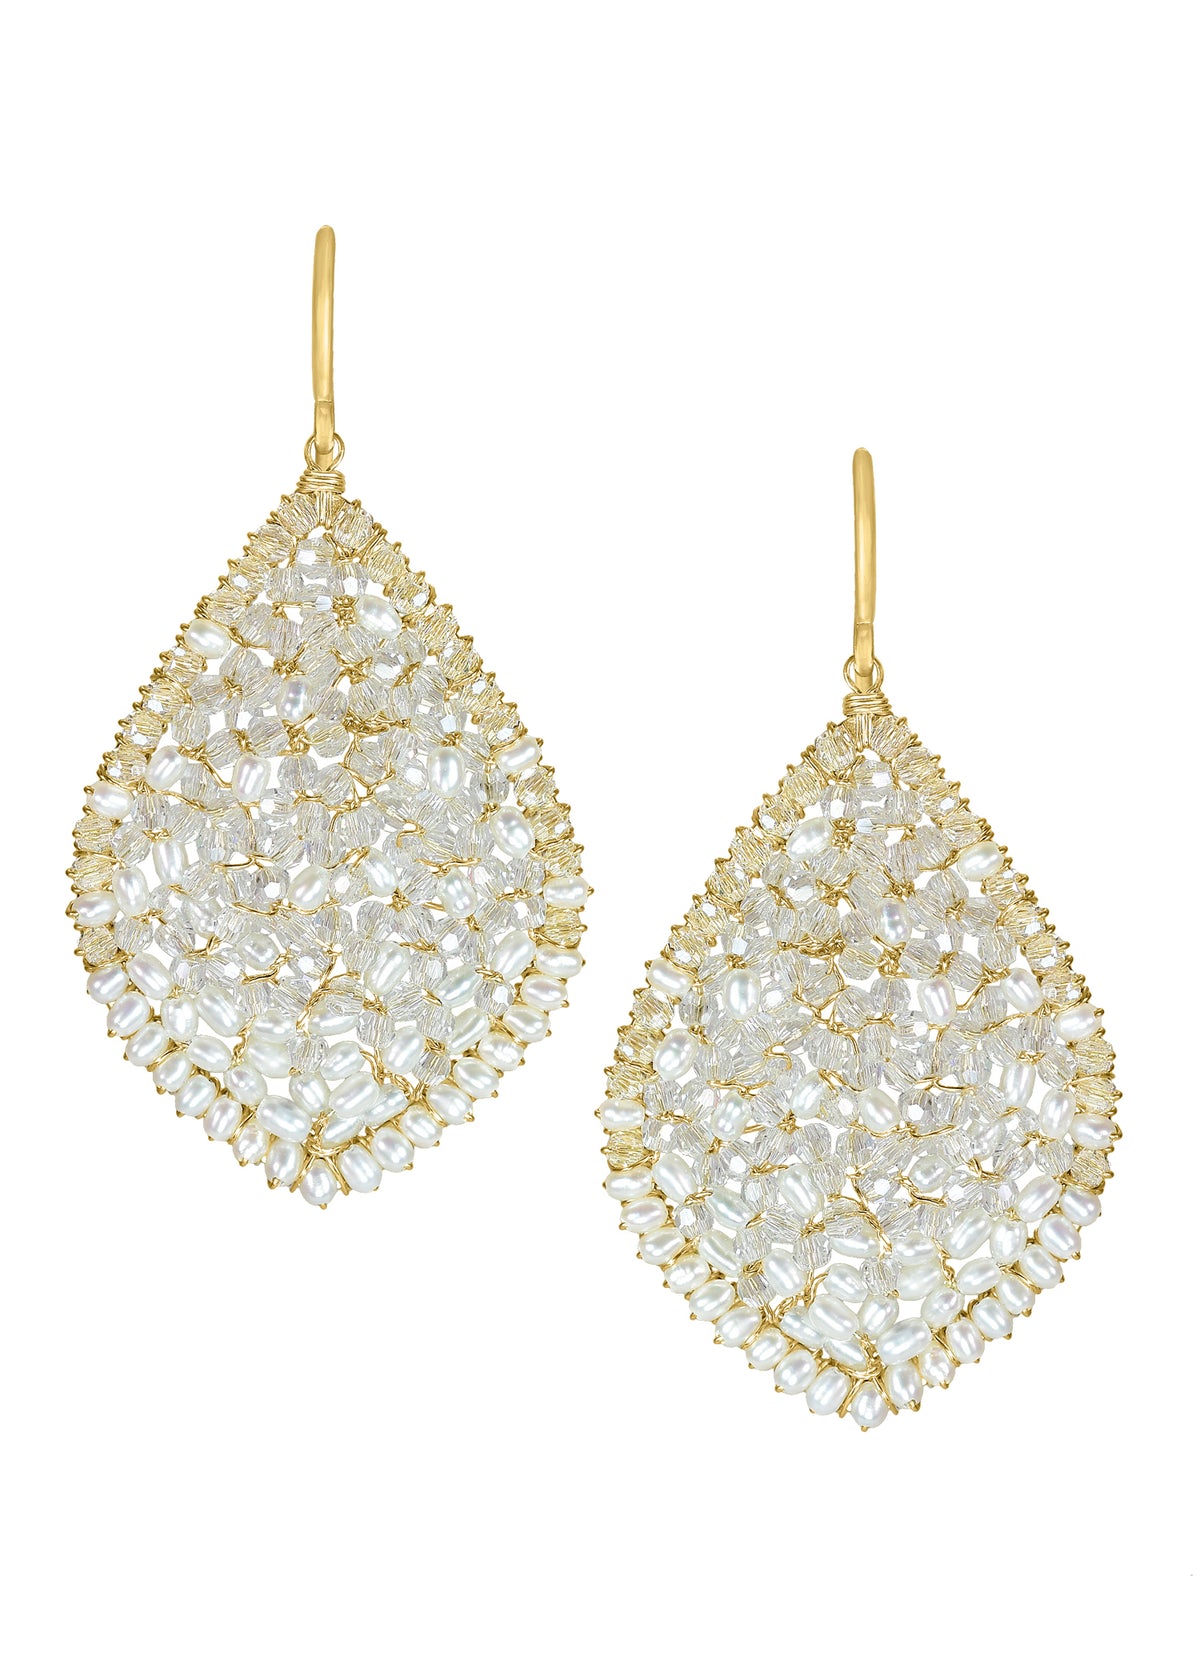 Crystal Freshwater pearl 14k gold fill Earrings measure 1-3/4&quot; in length (including ear wires) and 1&quot; in width at the widest point Handmade in our Los Angeles studio